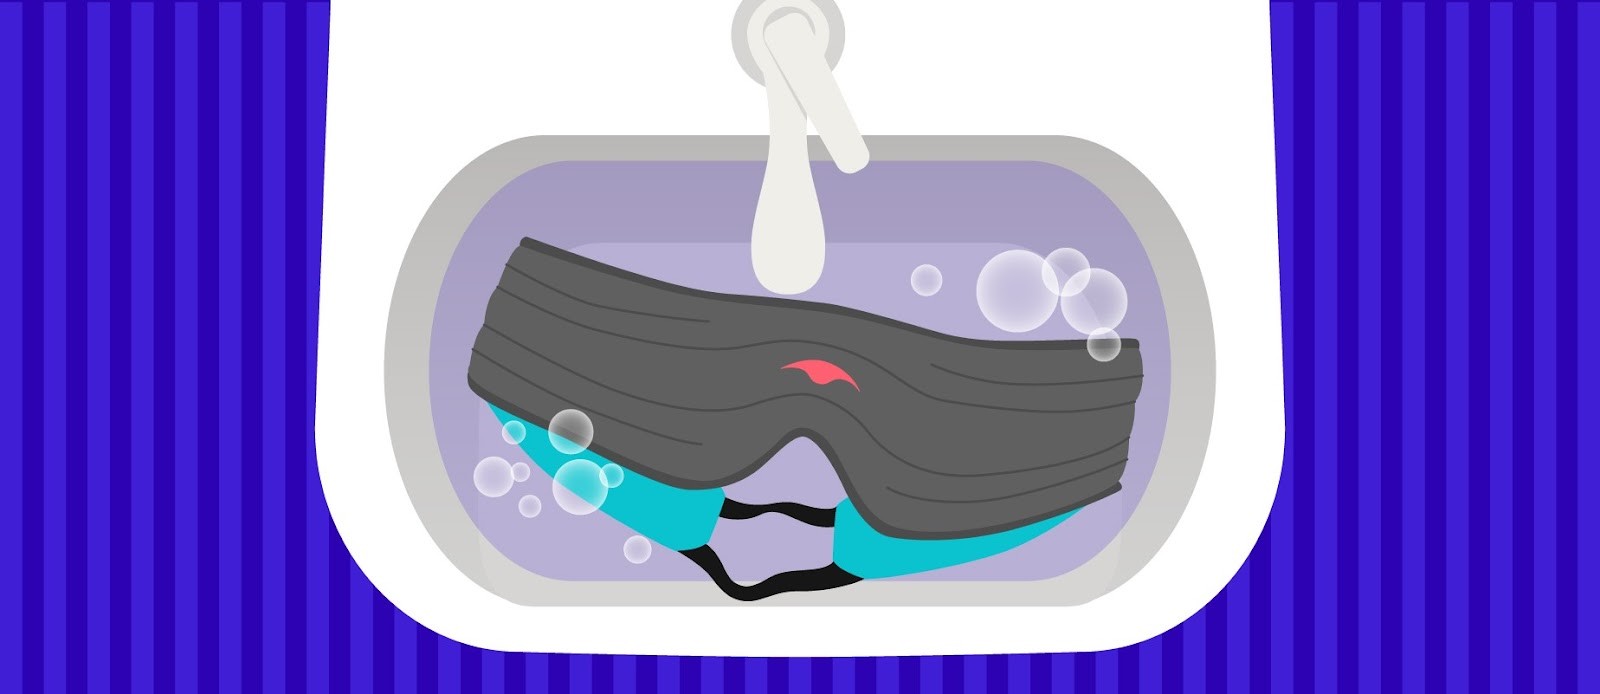 A dark gray weighted eye mask with a green interior, submerged in a sink filled with soapy water.